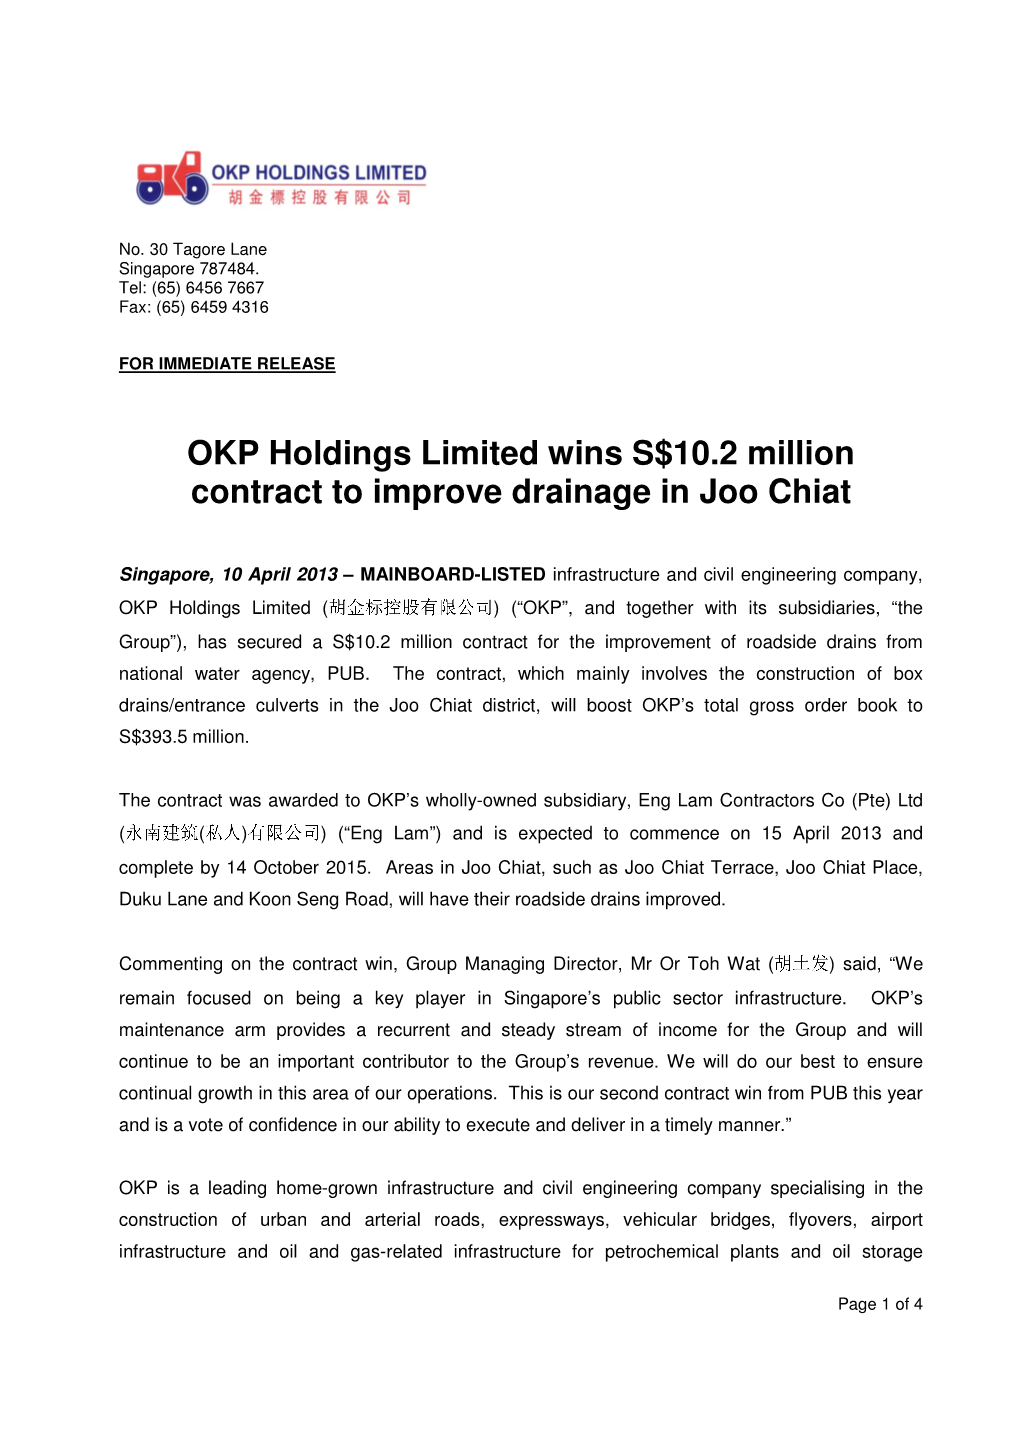 OKP Holdings Limited Wins S$10.2 Million Contract to Improve Drainage in Joo Chiat